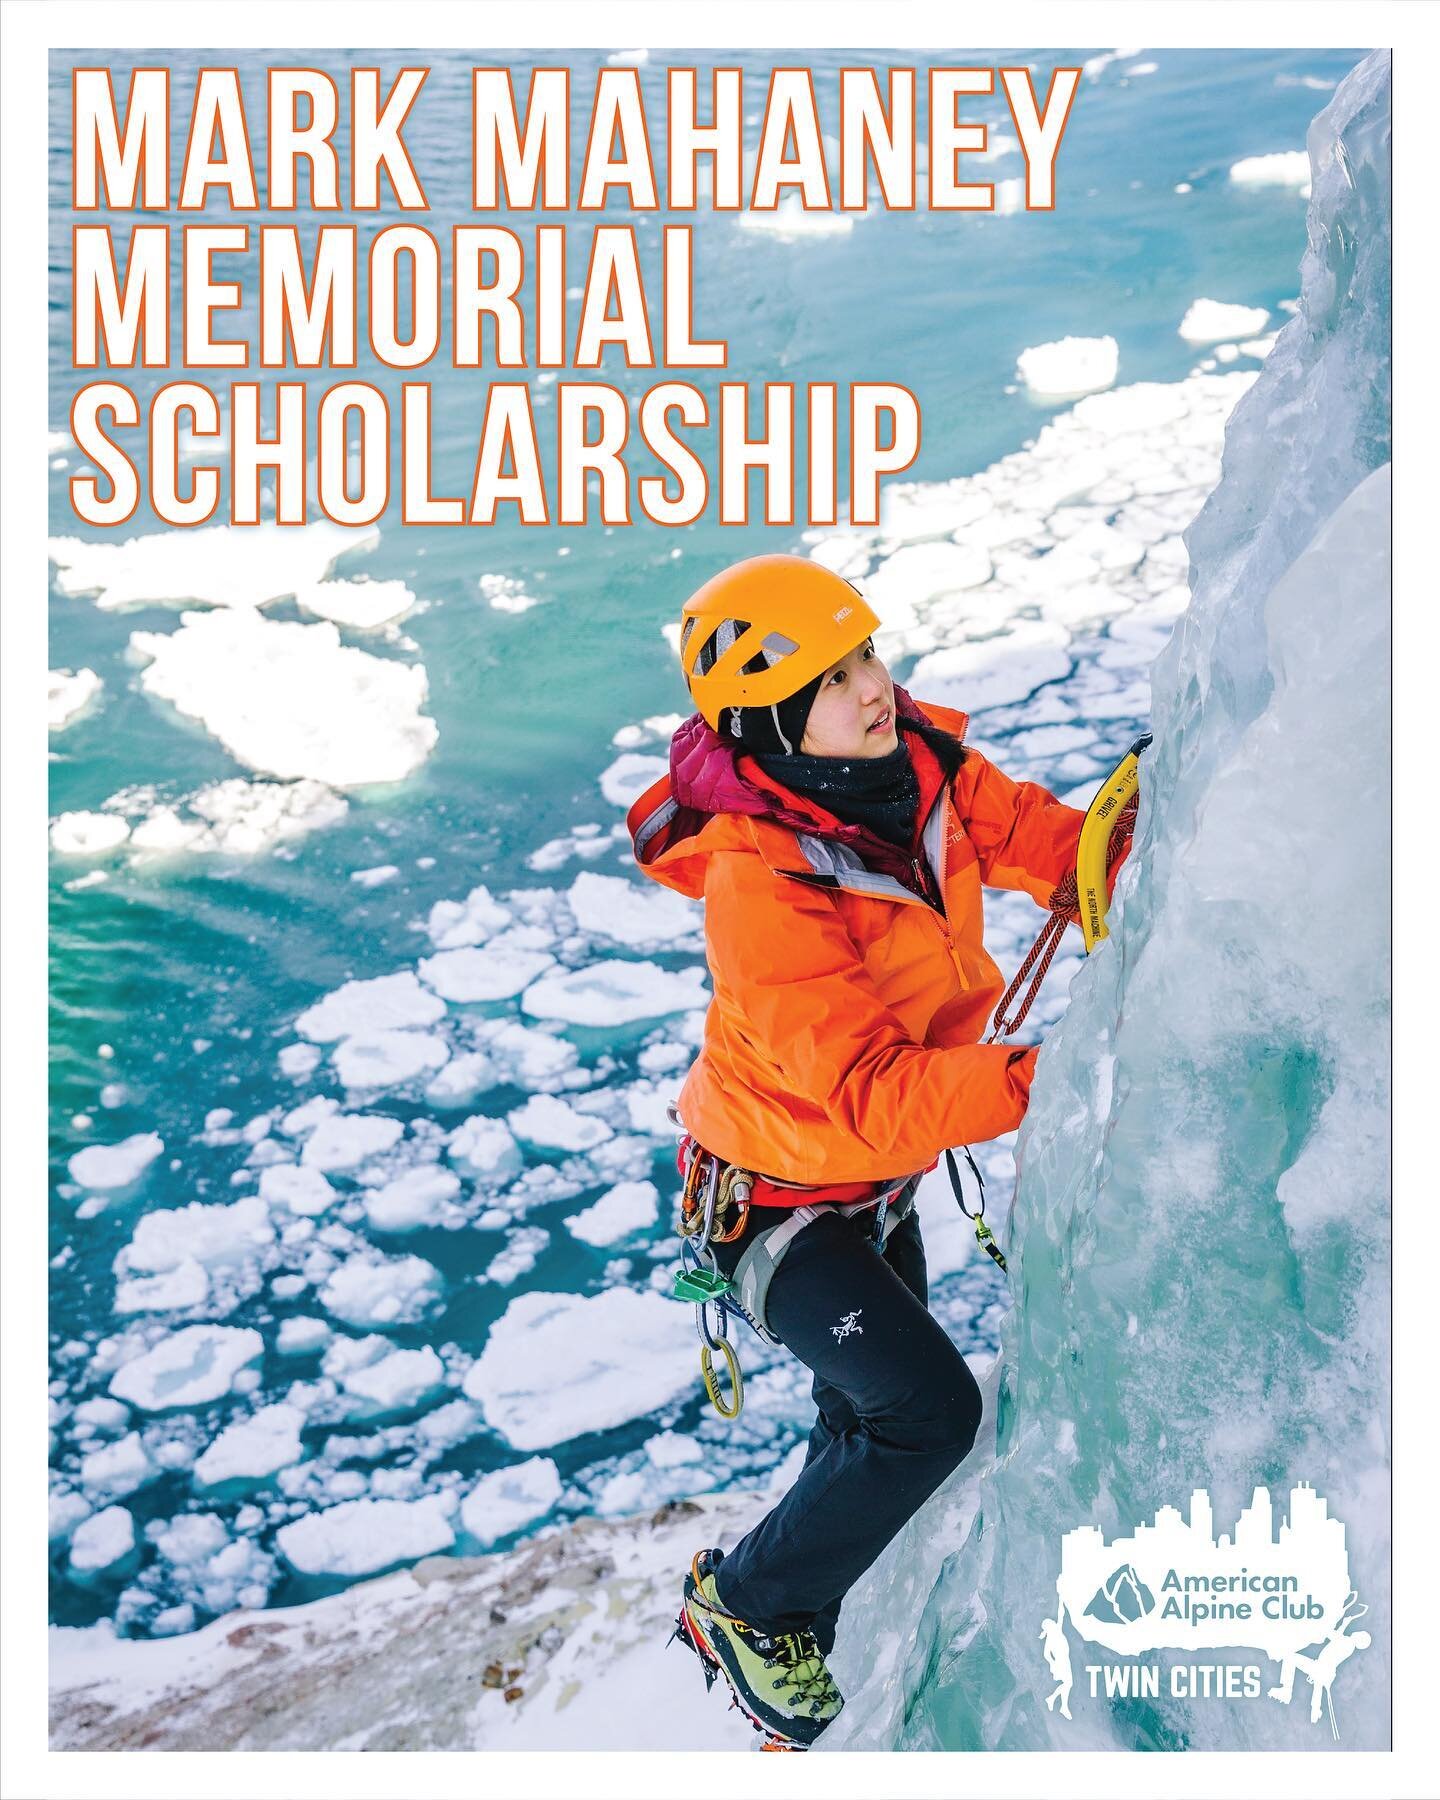 The application deadline for the Mark Mahaney Memorial Scholarship has been extended! Applications to attend the @michiganicefest are now due Friday, October 21st at 9 PM &mdash; link in our bio for more info and to apply! Winners will be announced a